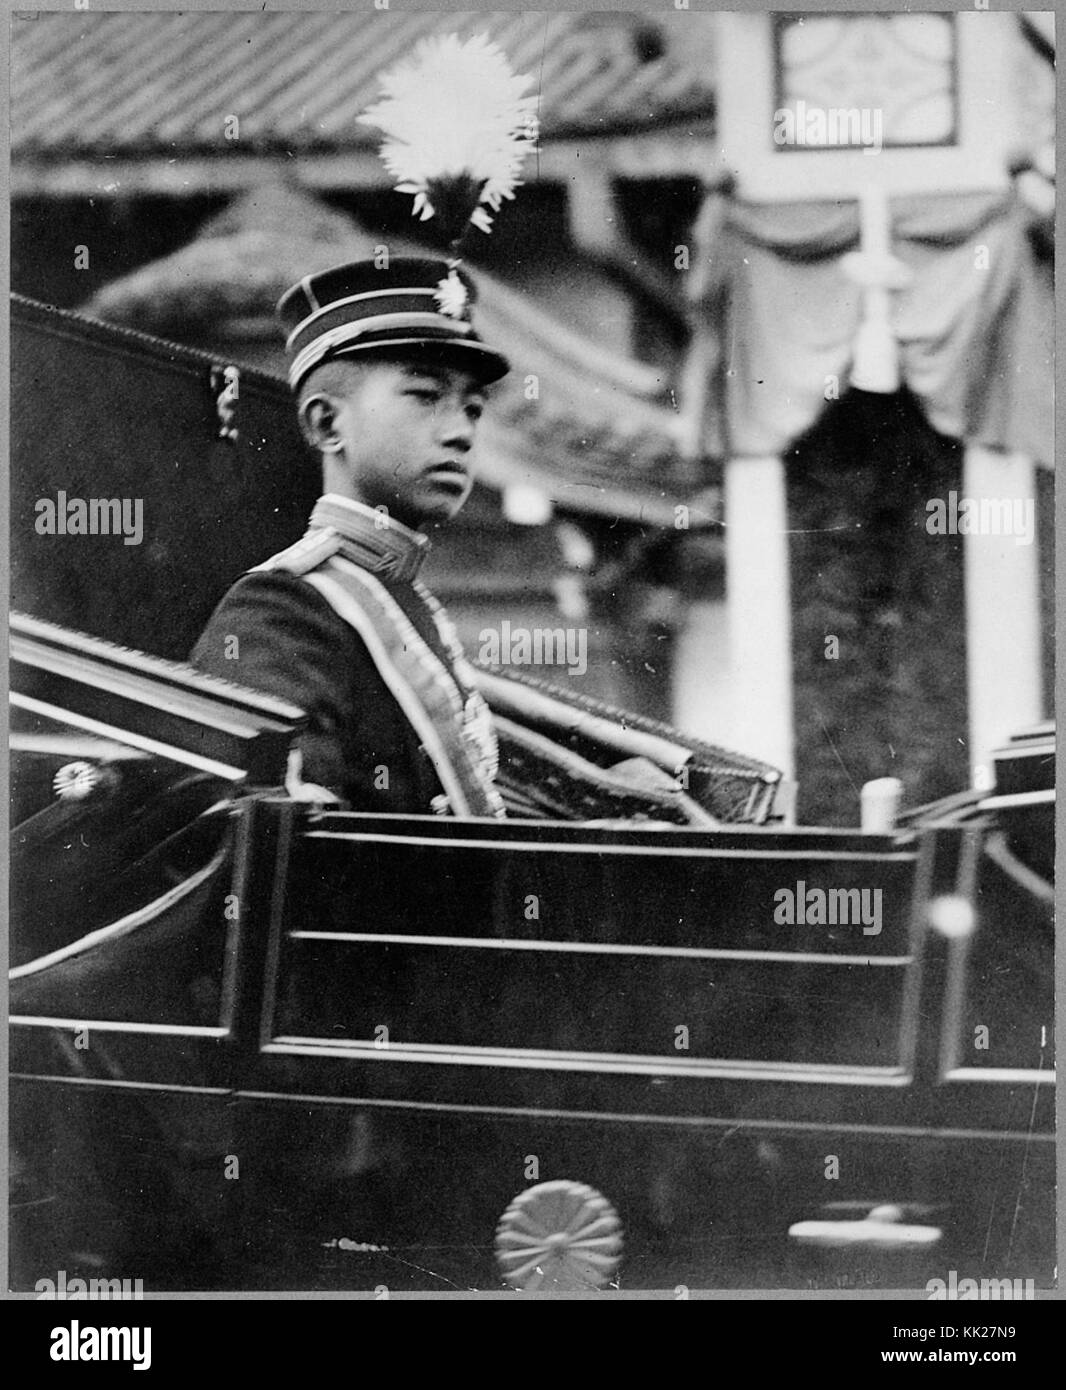 Hirohito, Emperor of Japan, half length portrait, facing right, seated in carriage with chrysanthemum emblem on the door Stock Photo